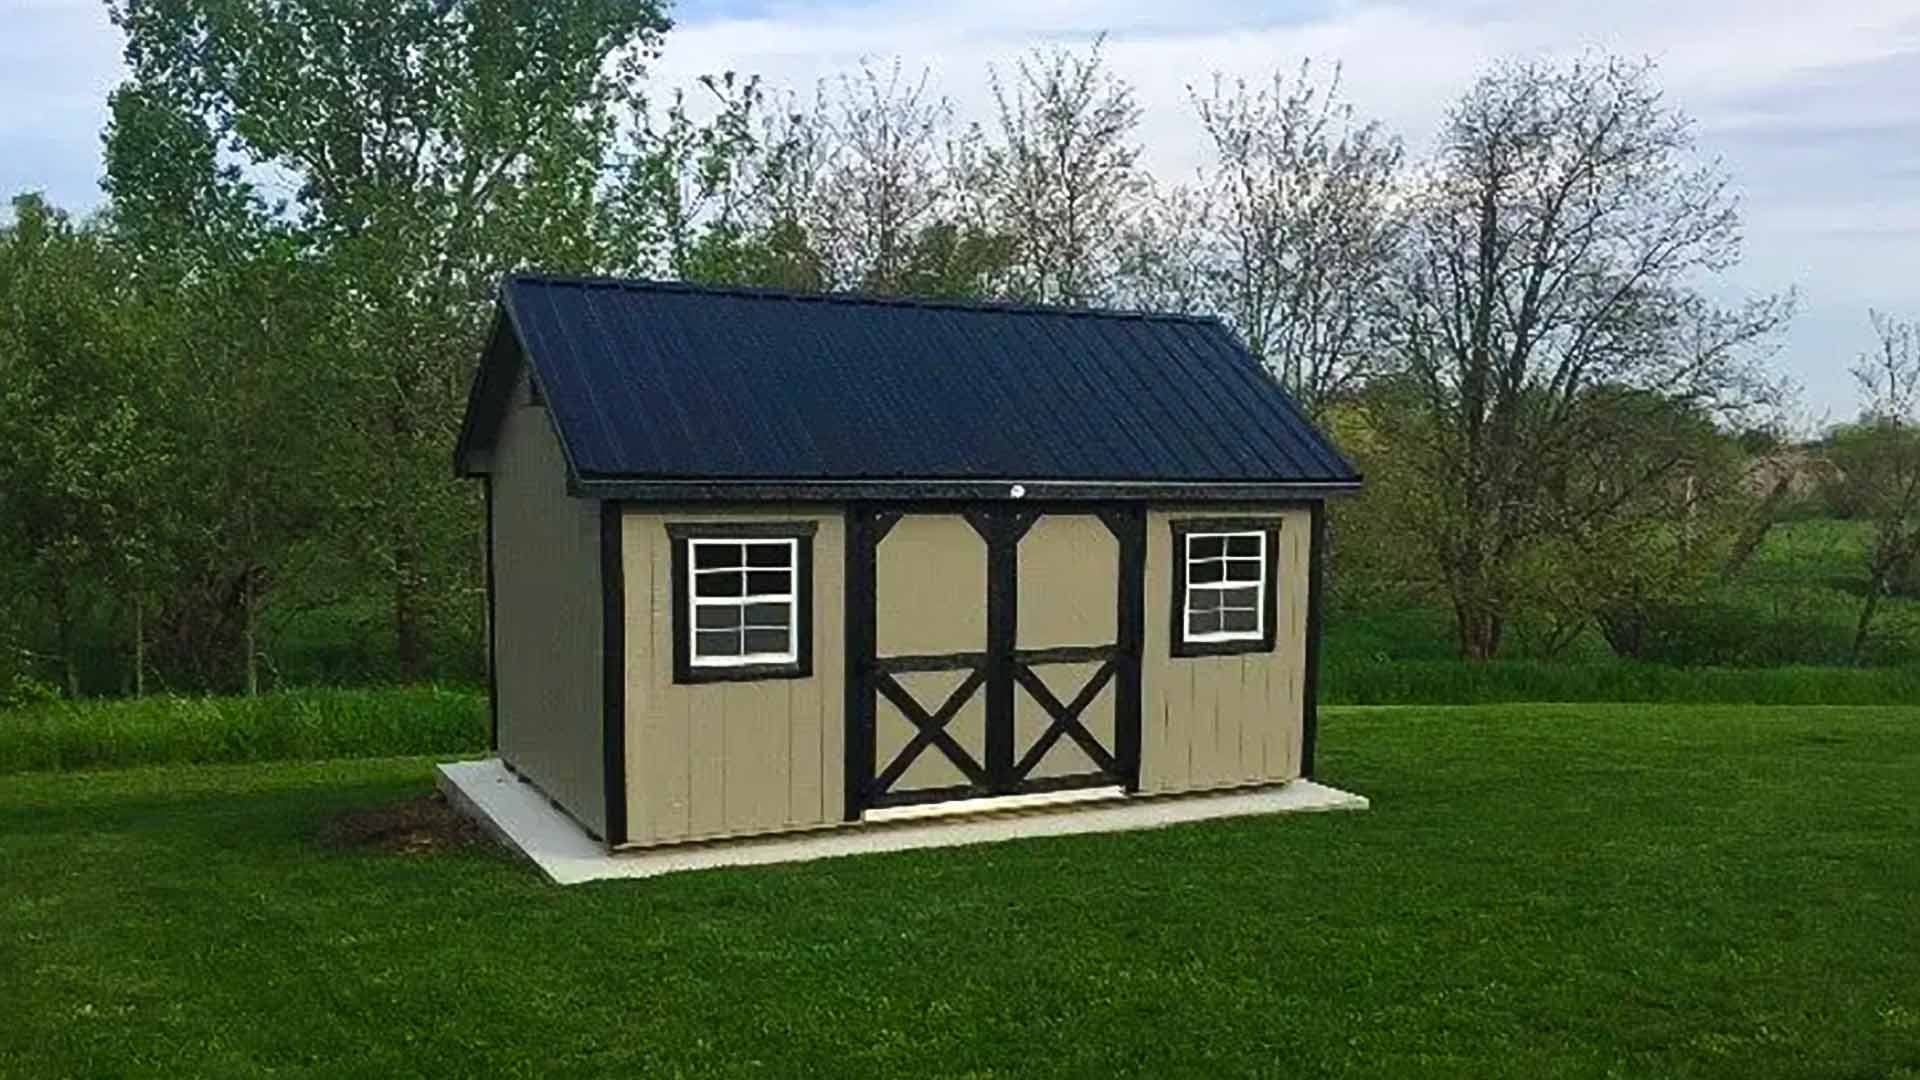 Sun Rise Sheds | Backyard Storage: The Benefits of Having a Shed in Your Backyard